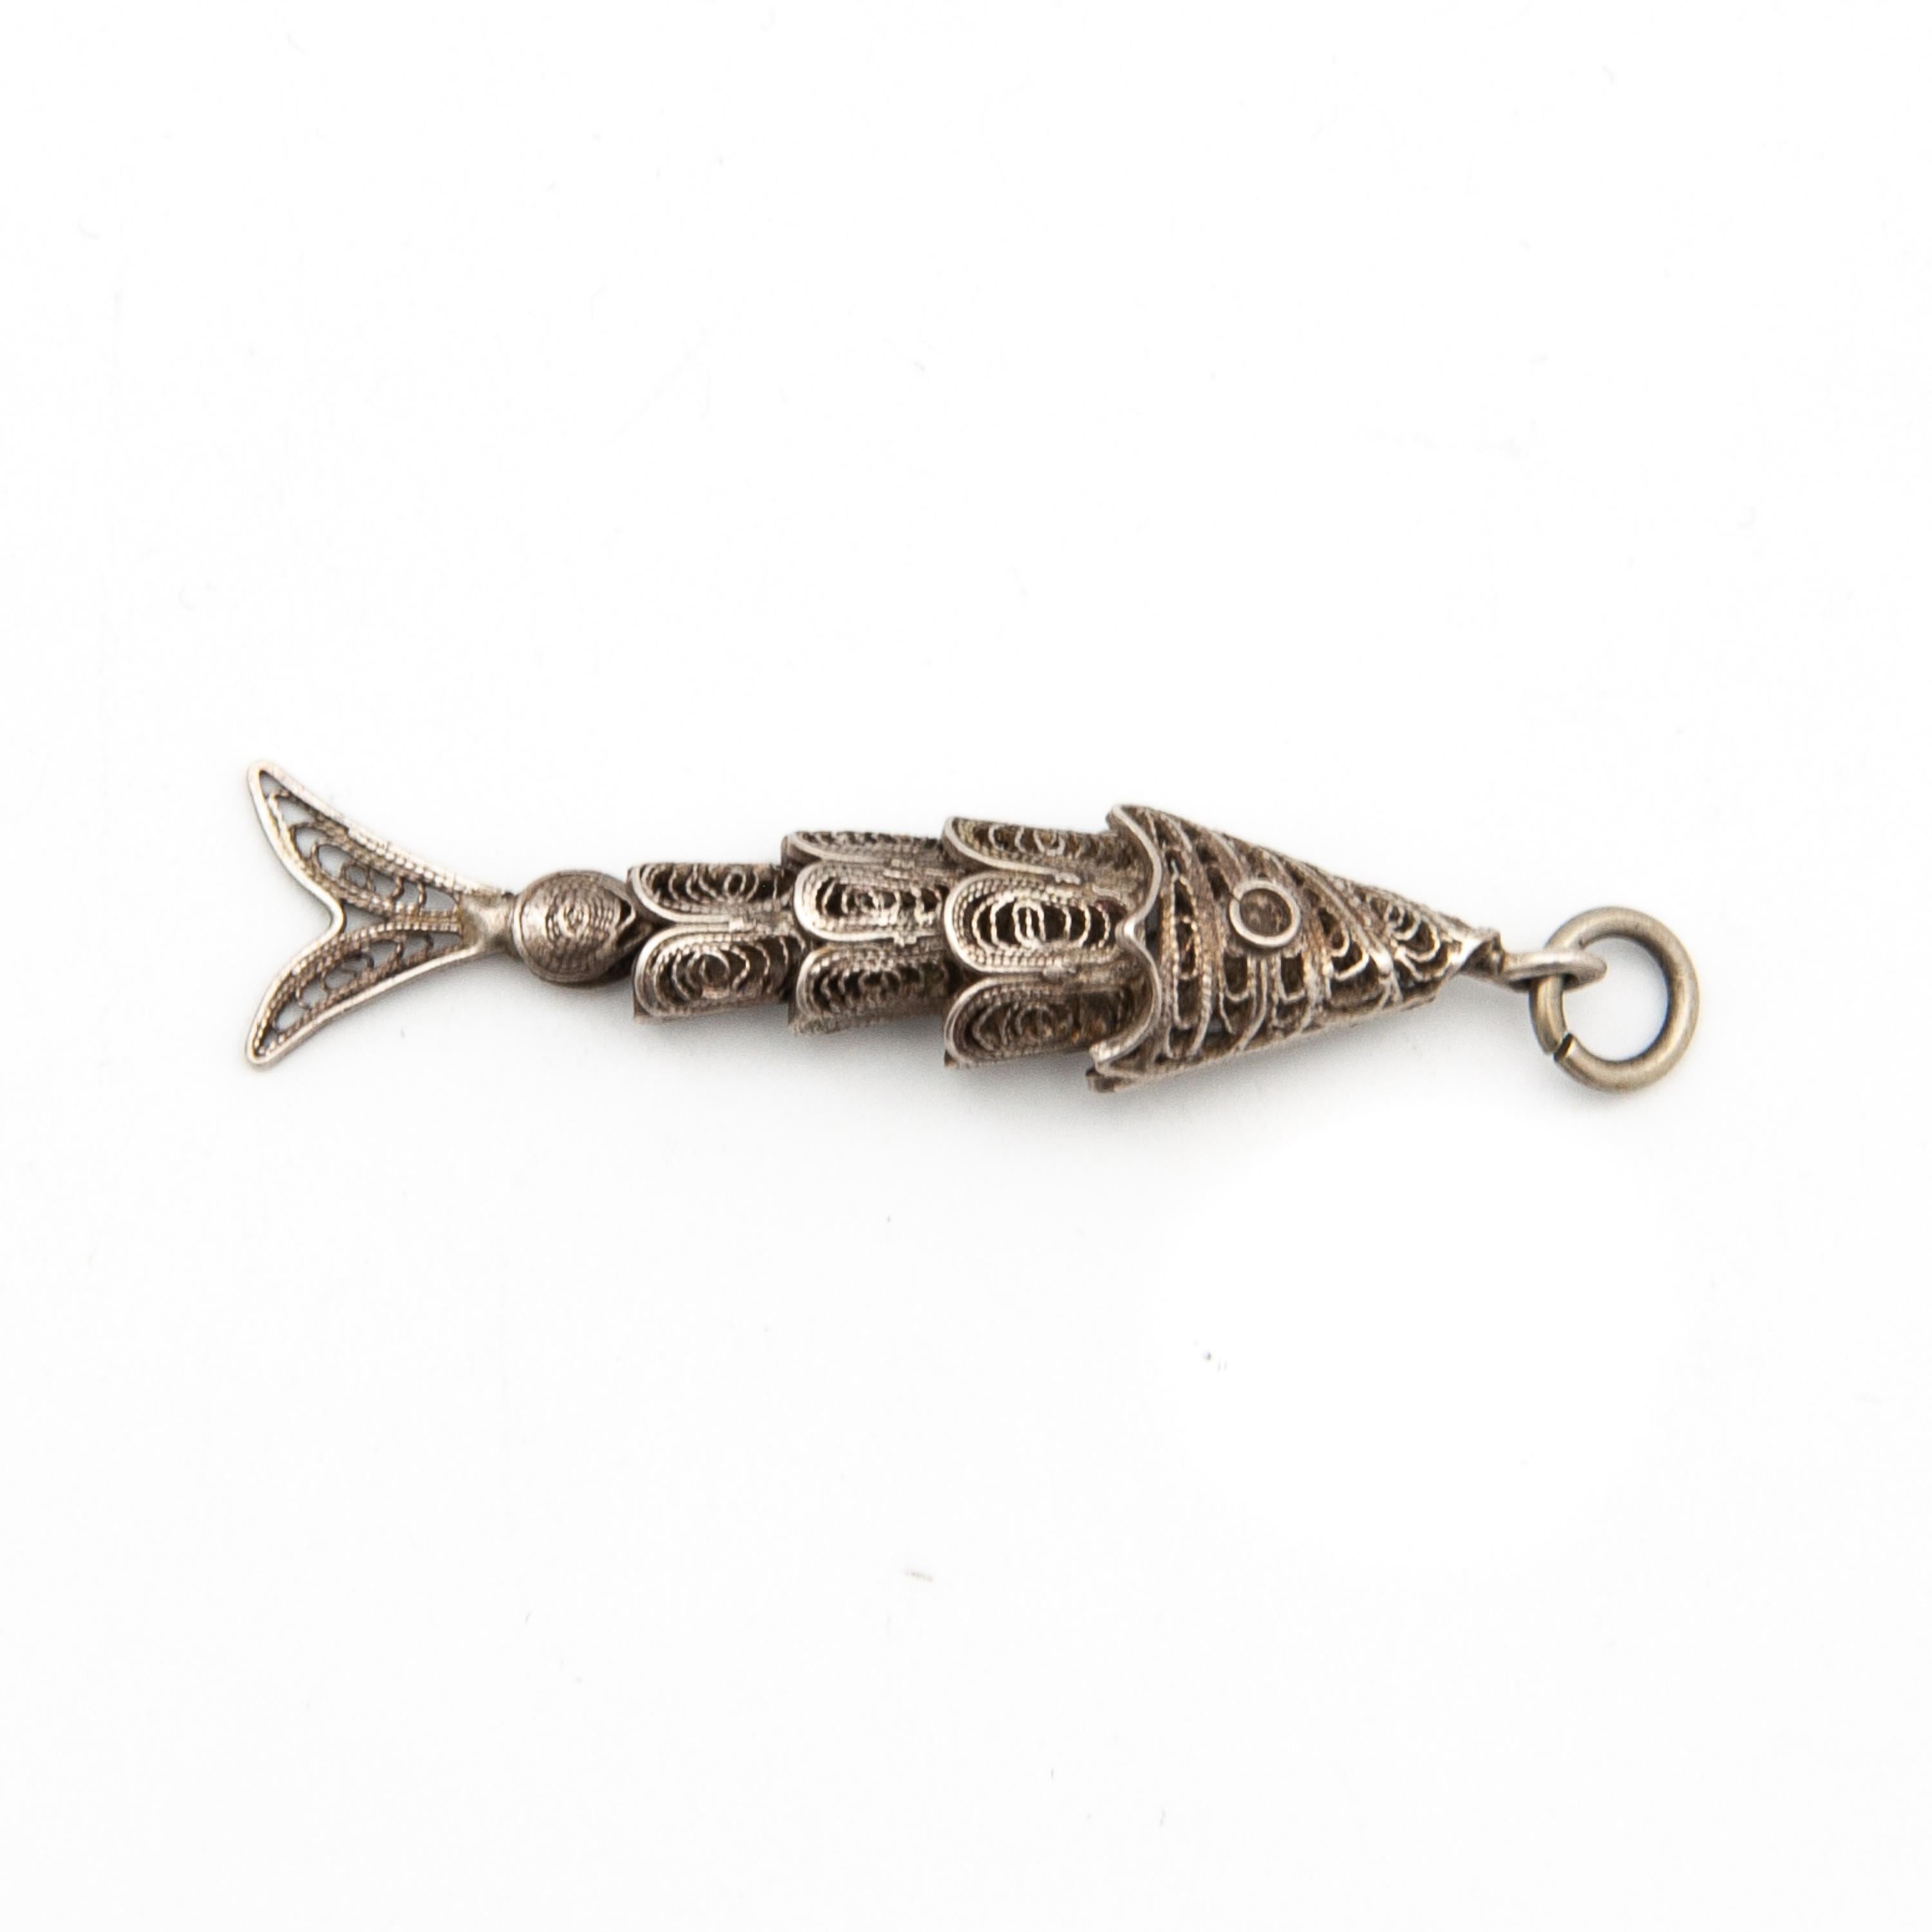 Women's or Men's Vintage Articulated Filigree Fish Silver Charm Pendant